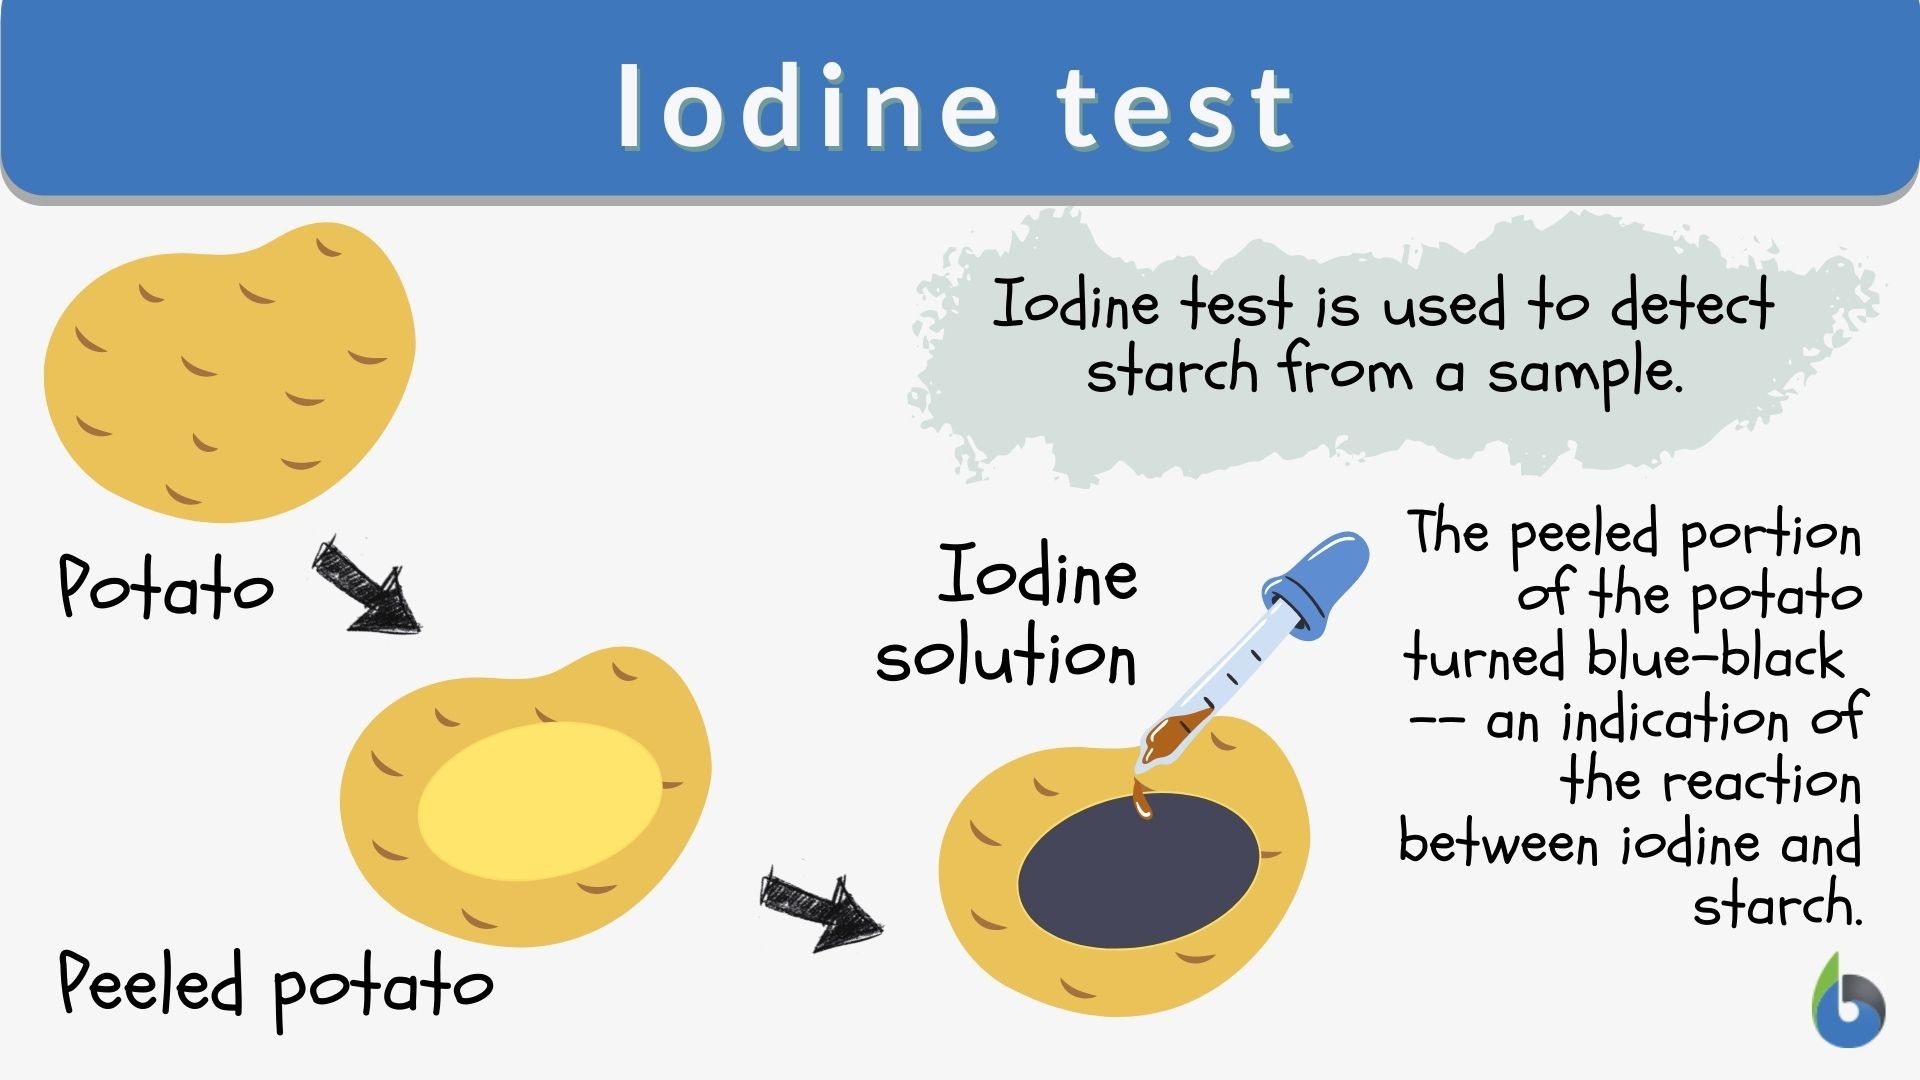 Iodine test - Definition and Examples - Biology Online Dictionary